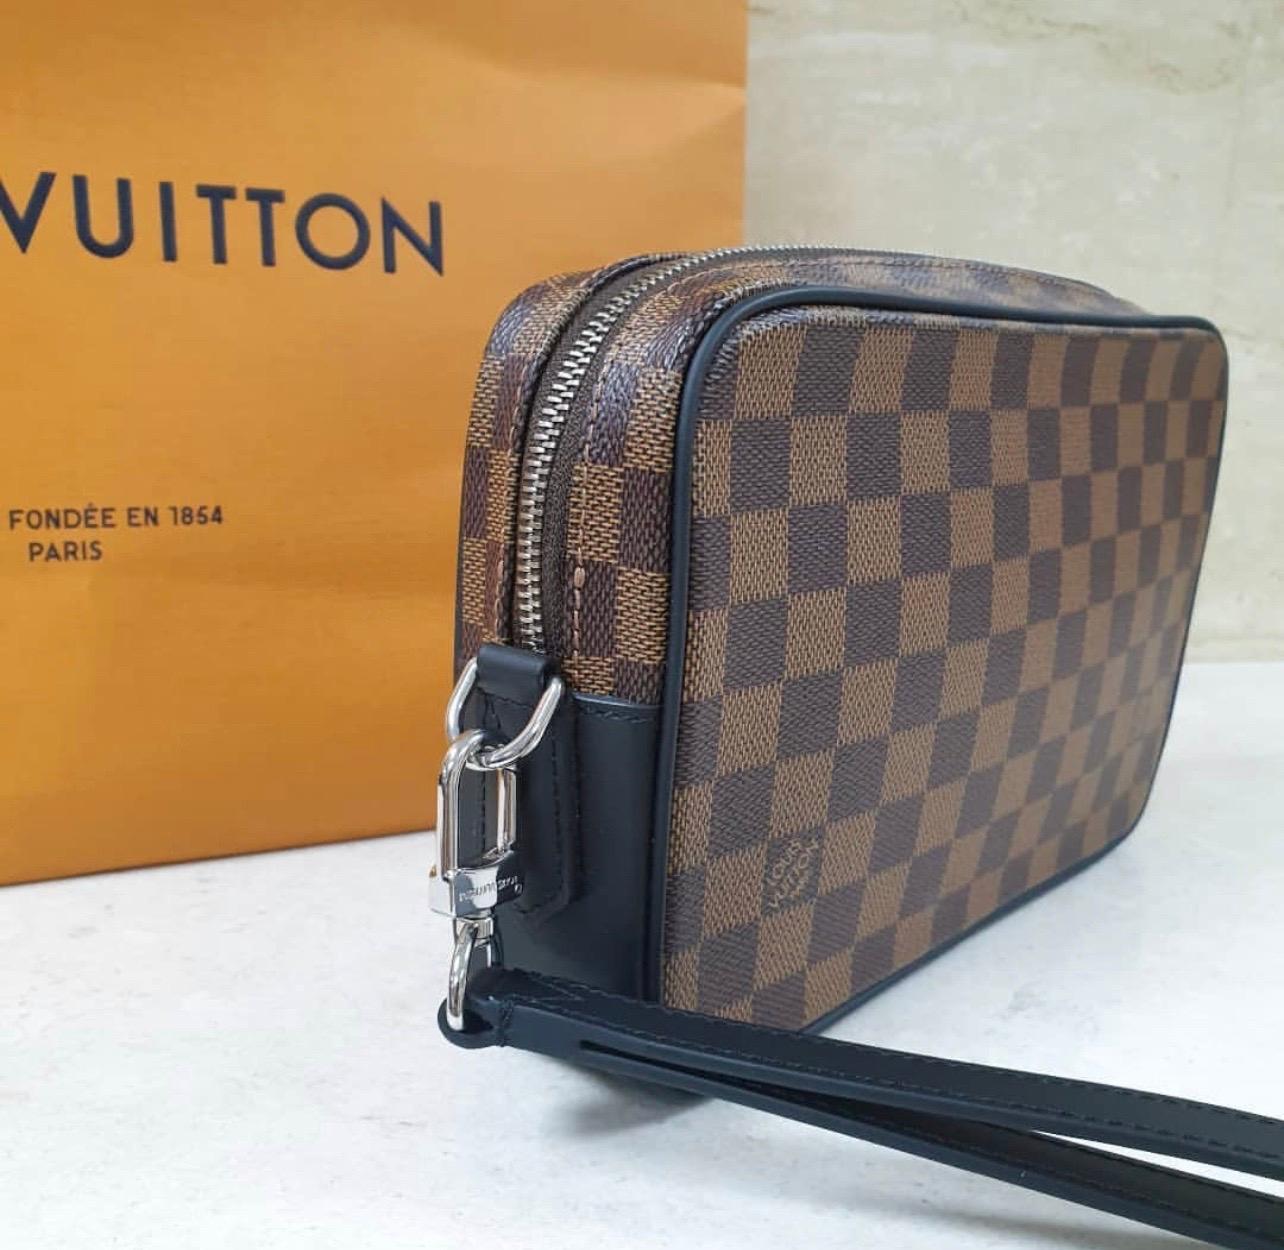 The Louis Vuitton Damier Canvas Kasai Clutch Bag is a classic silhouette that can be used as a clutch or cosmetic bag. 
The interior is large enough to hold your wallet, keys, and sunglasses! Its compact size and wristlet strap makes this perfect to